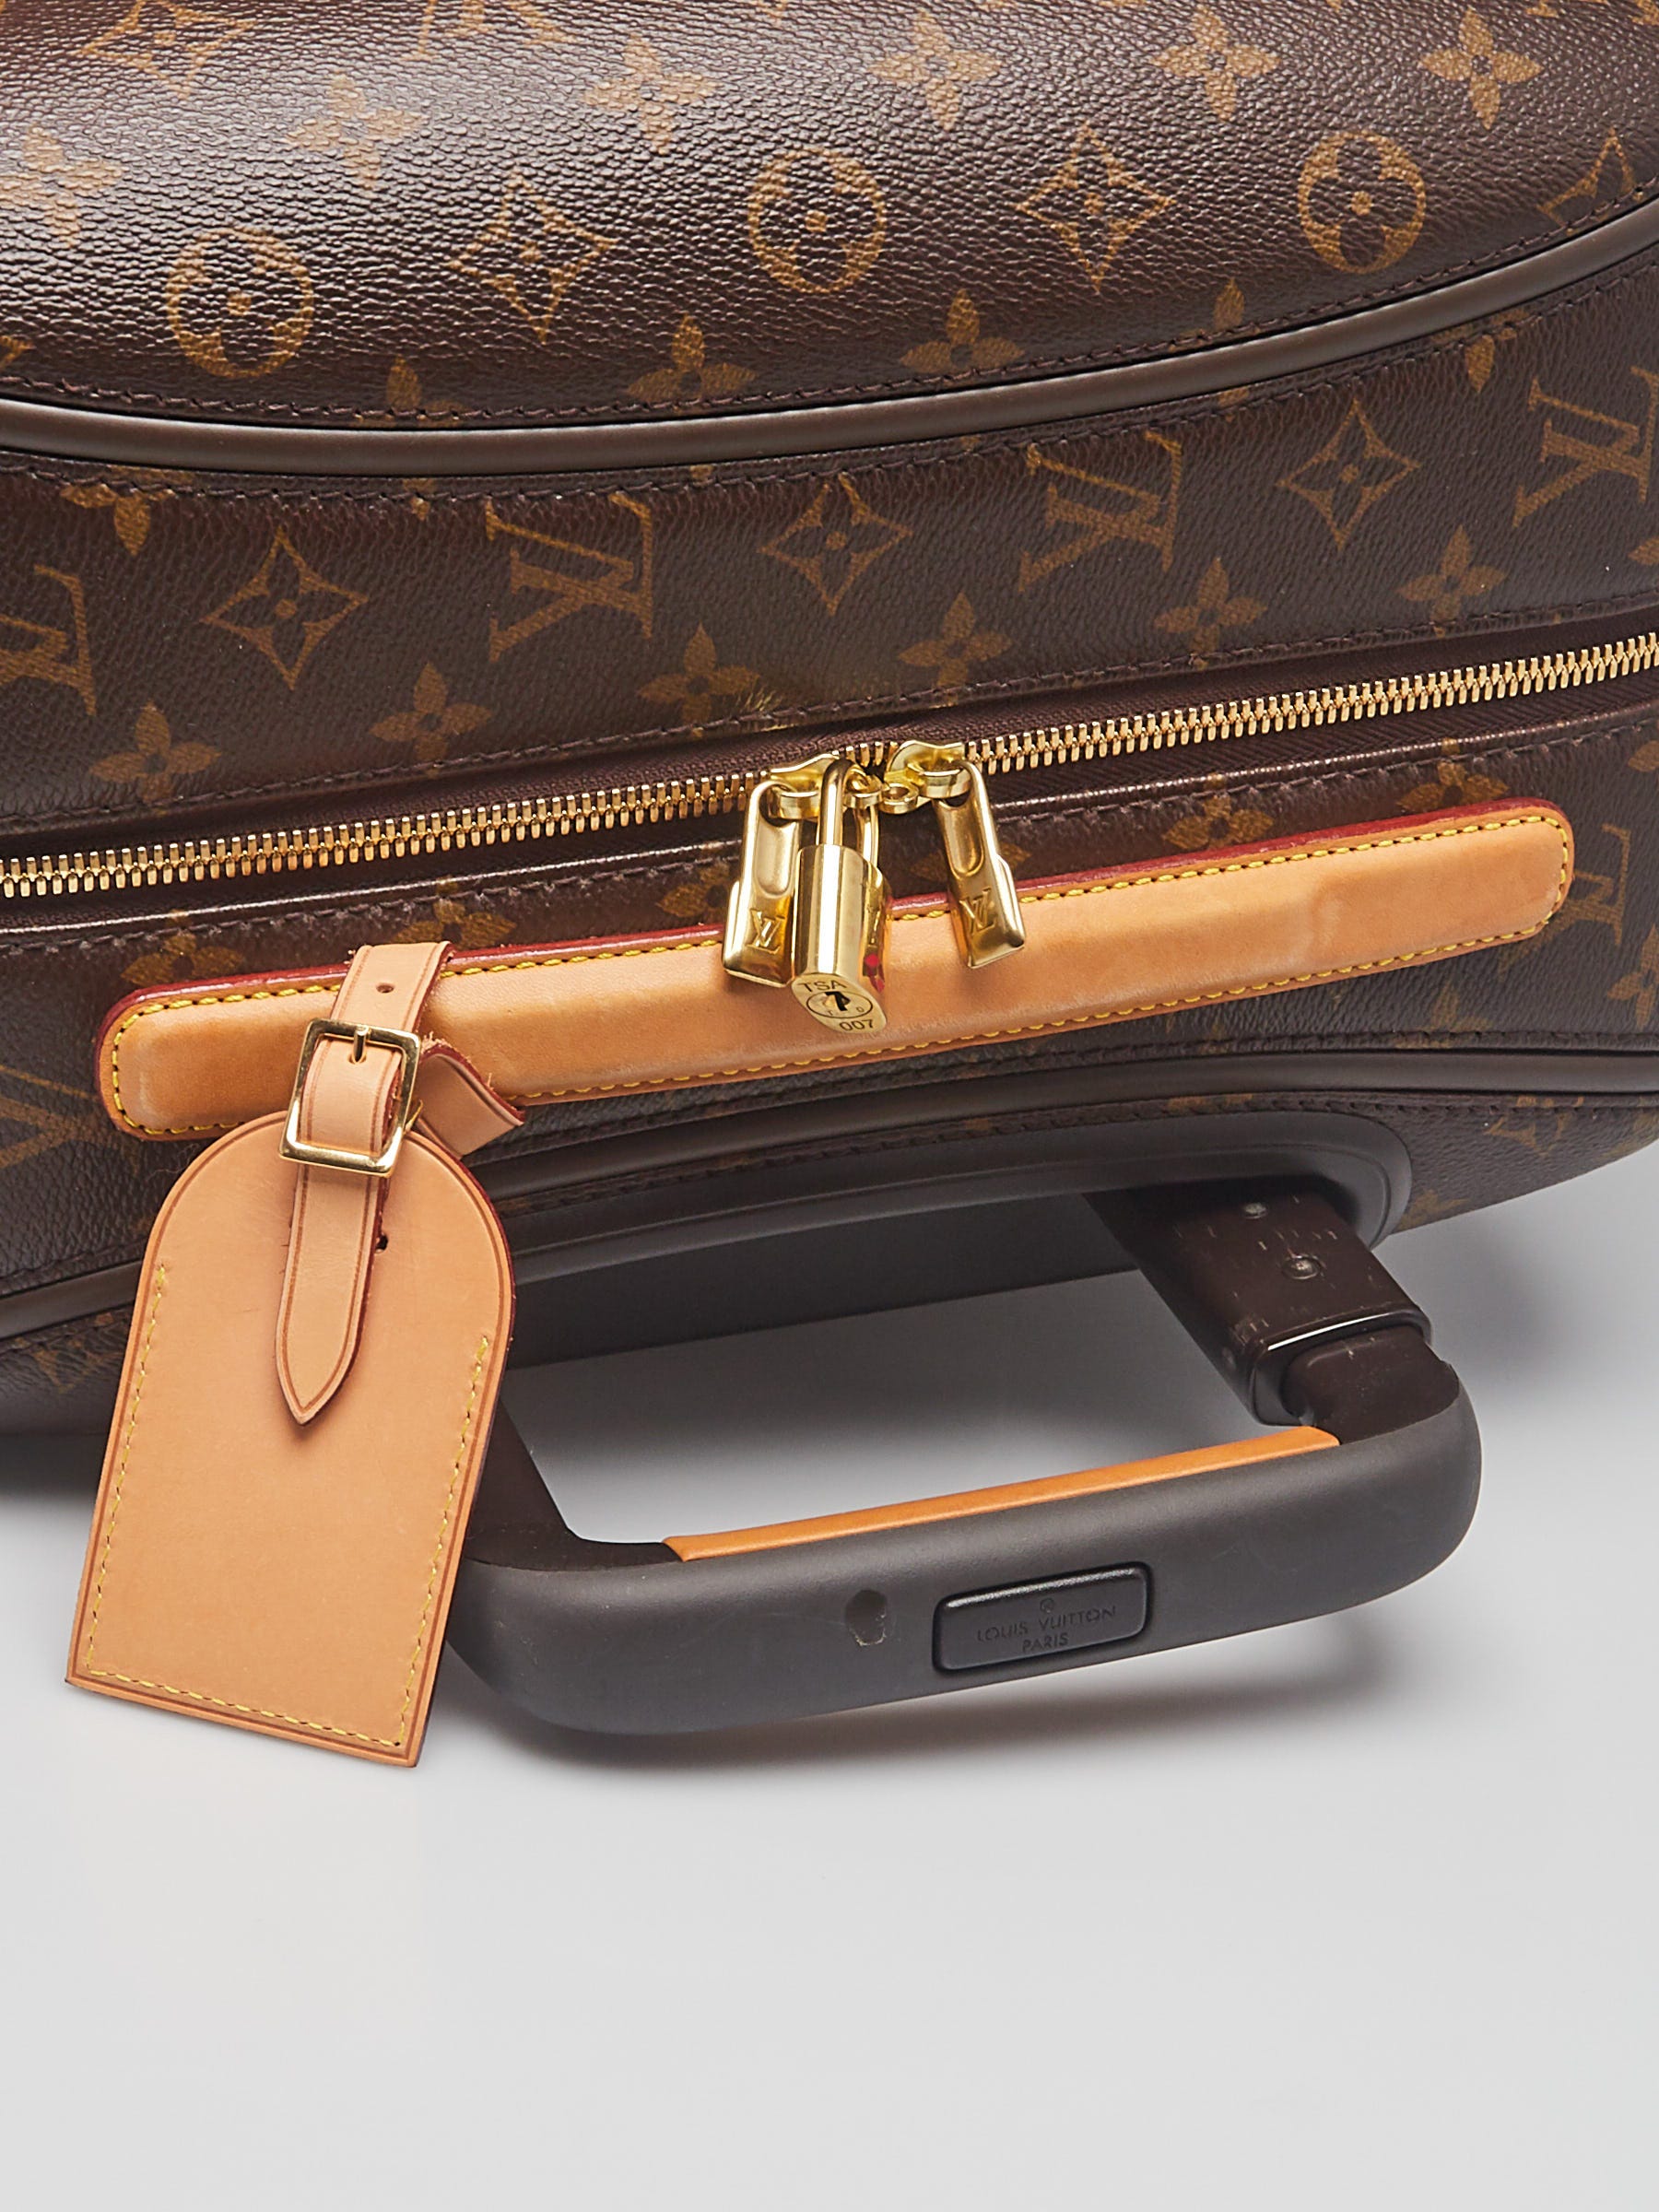 Introducing the newest Louis Vuitton travel luggage, the four wheeled Zephyr.